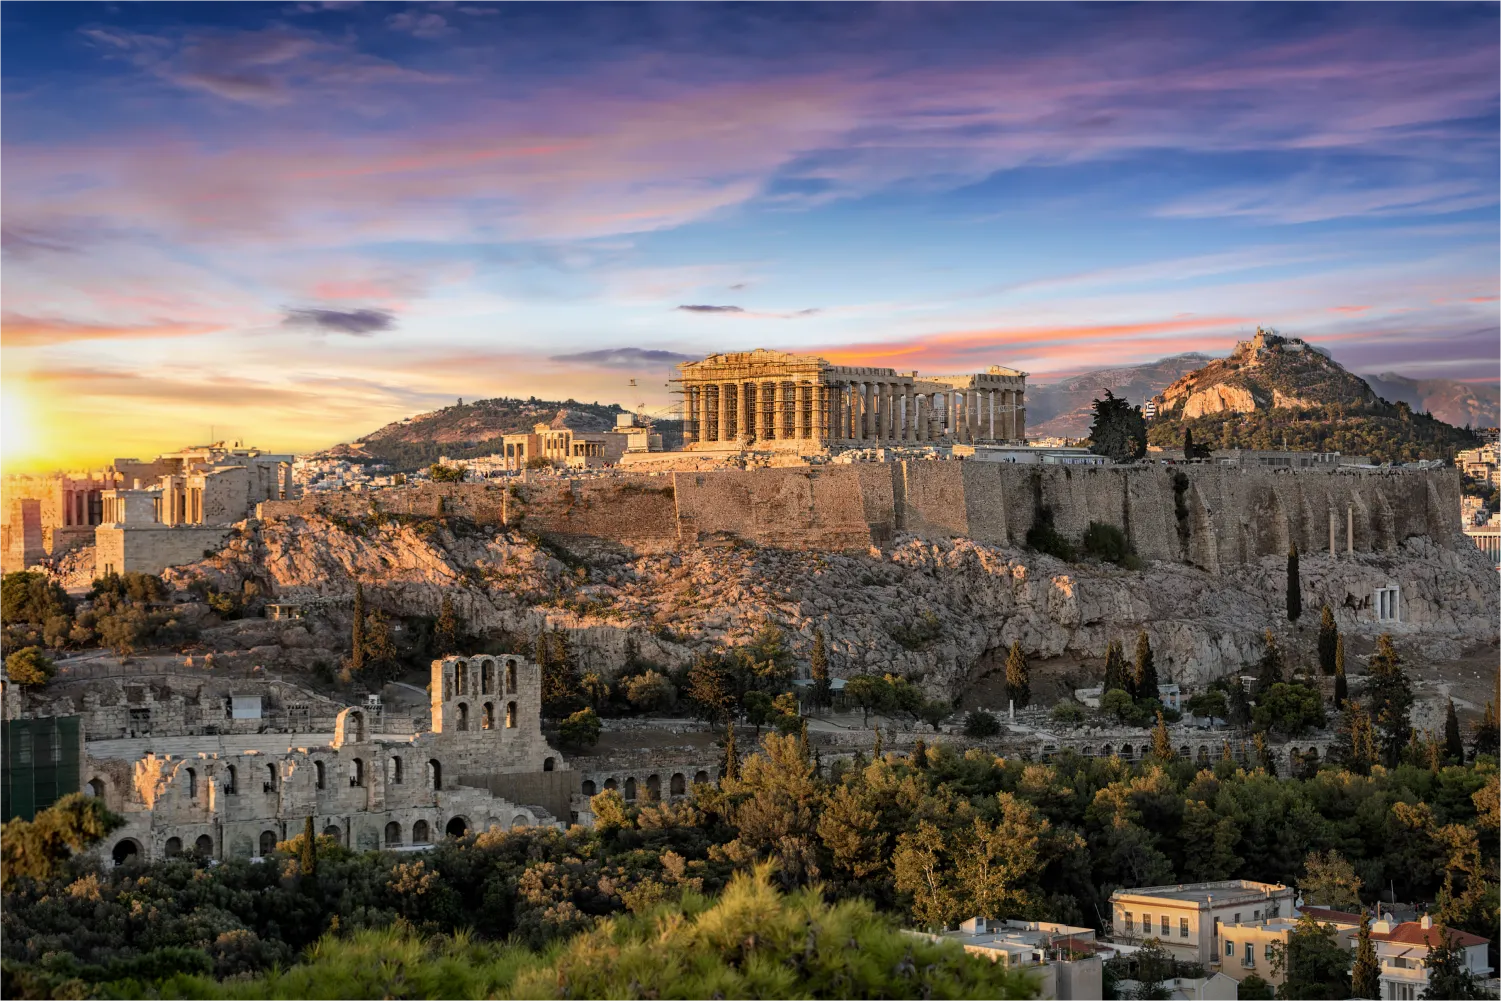 View of the dazzling Acropolis of Athens and its surroundings